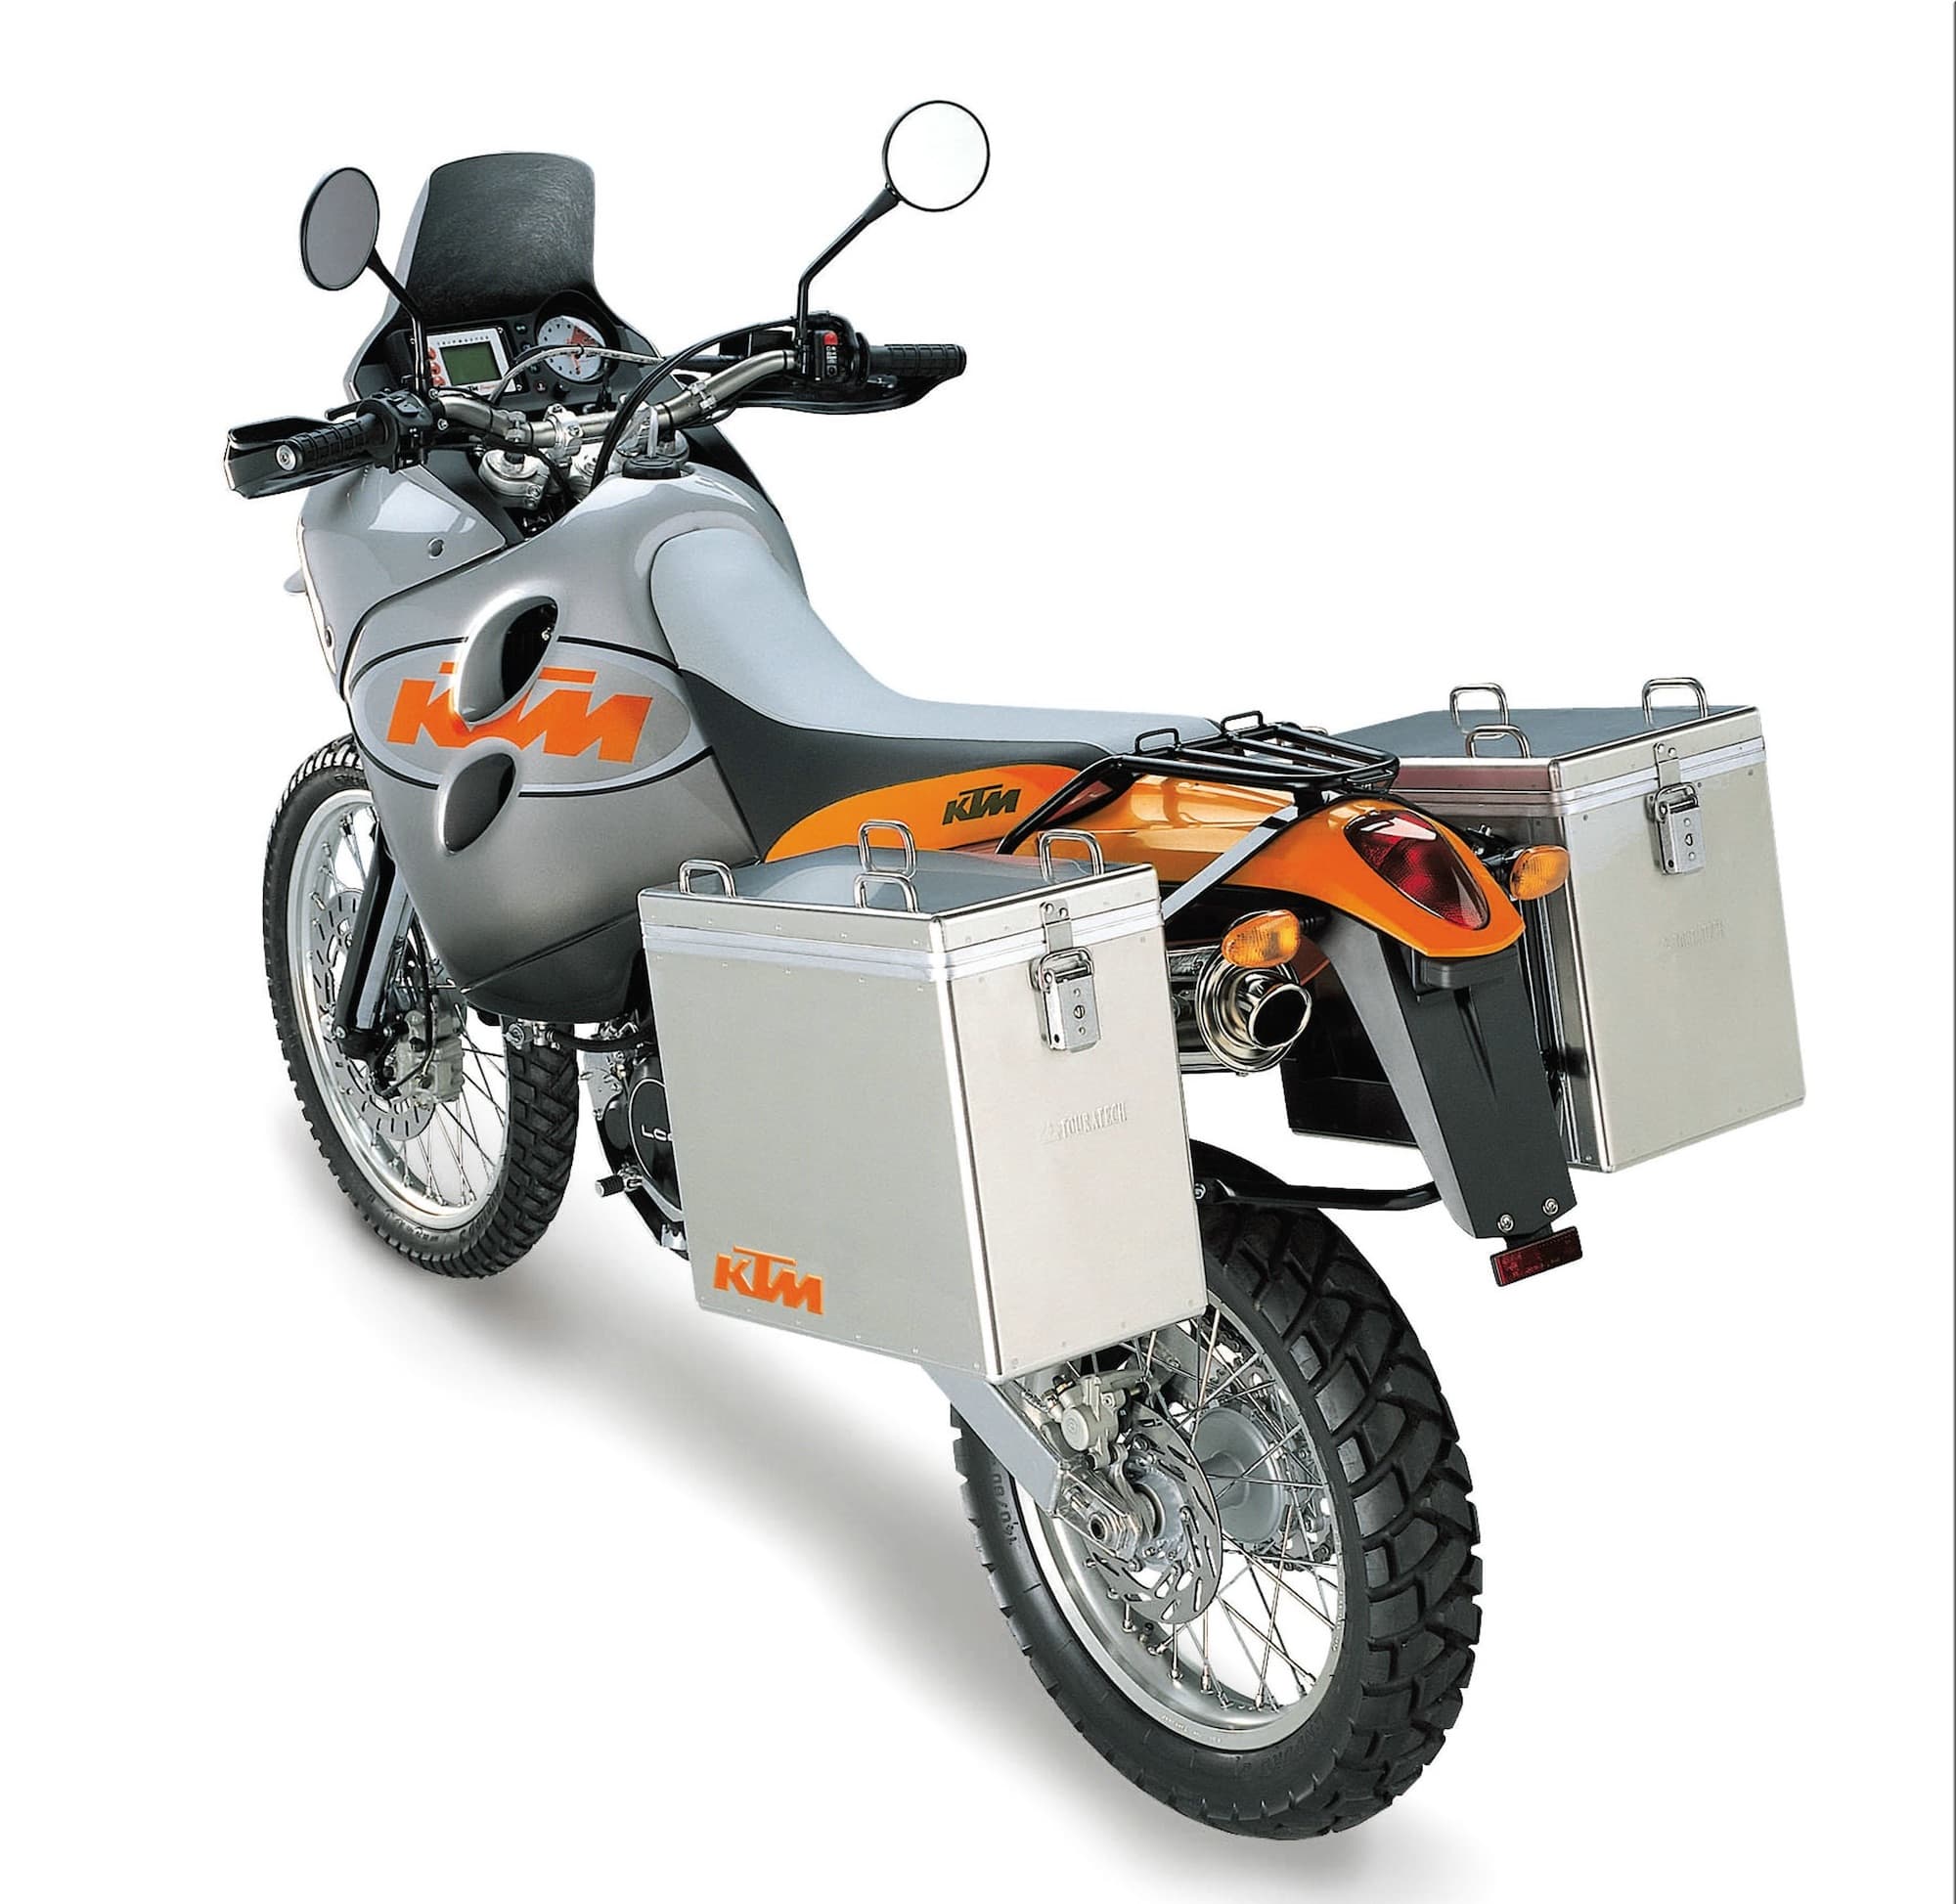 KTM 640 Adventure with luggage rear lhs 3-4